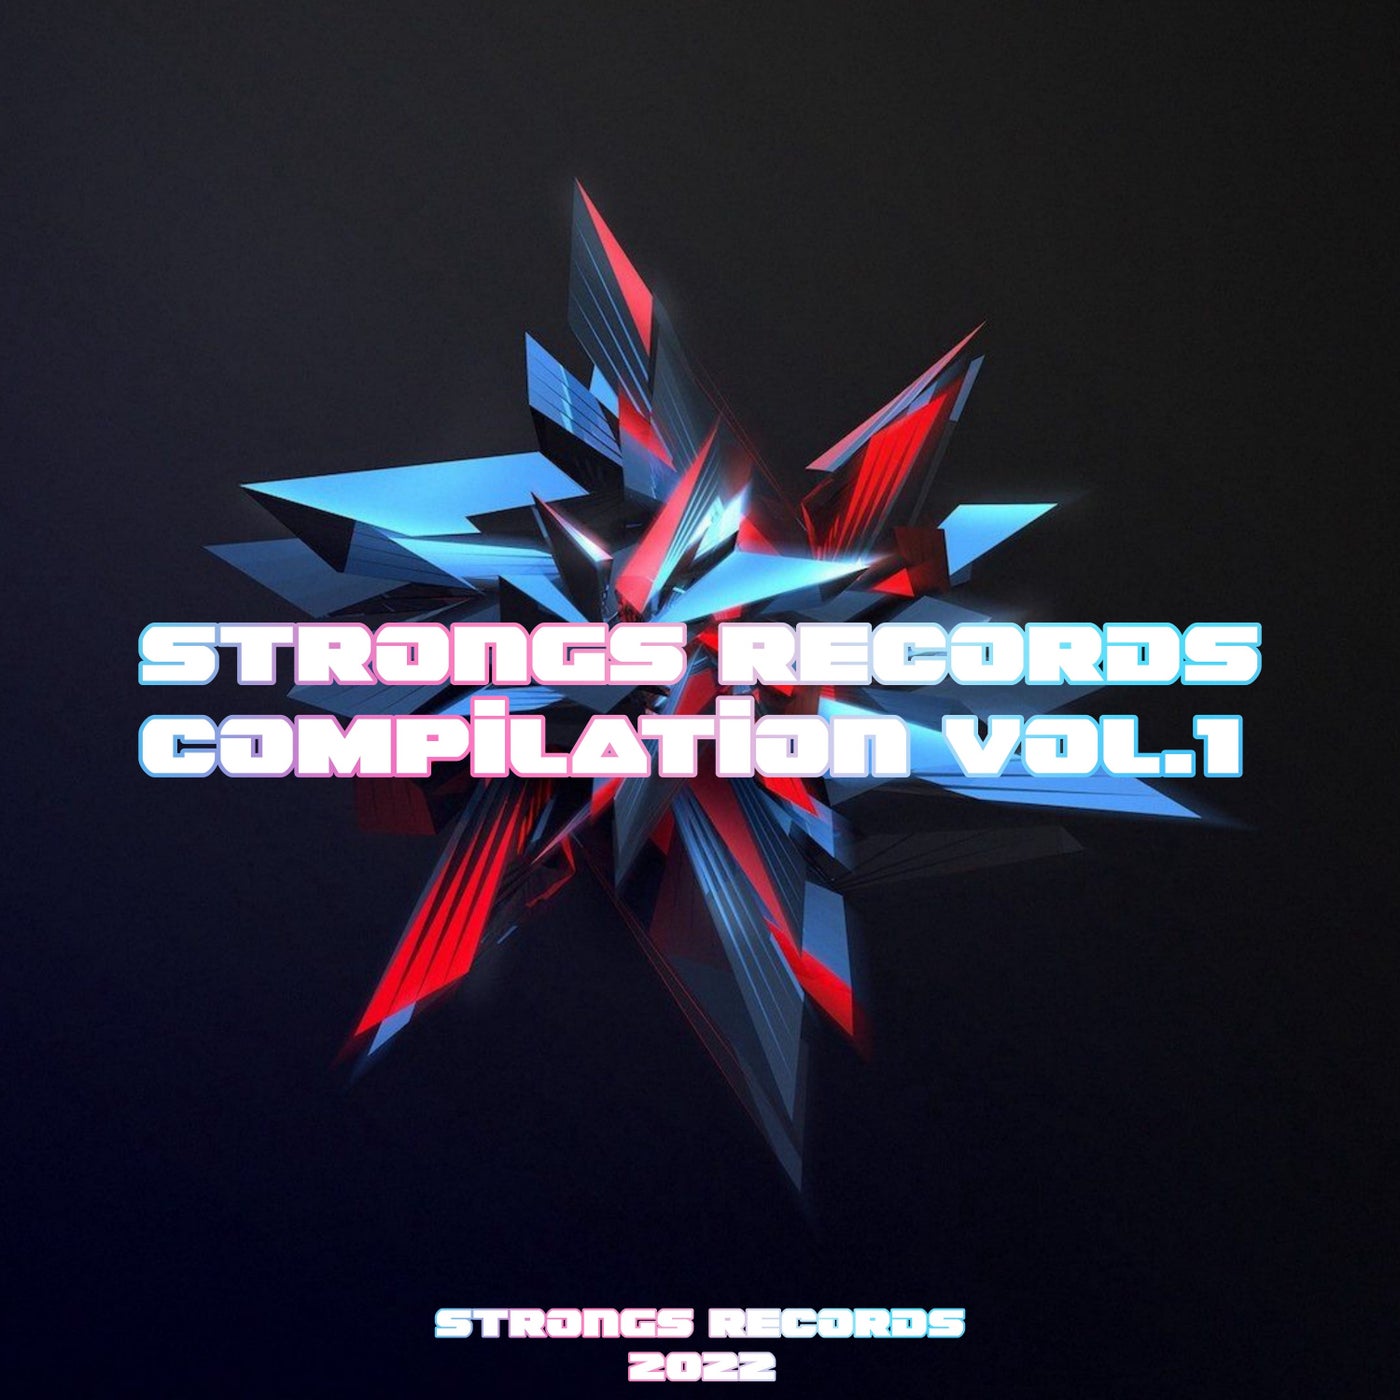 Strongs Records Compilation Vol.1